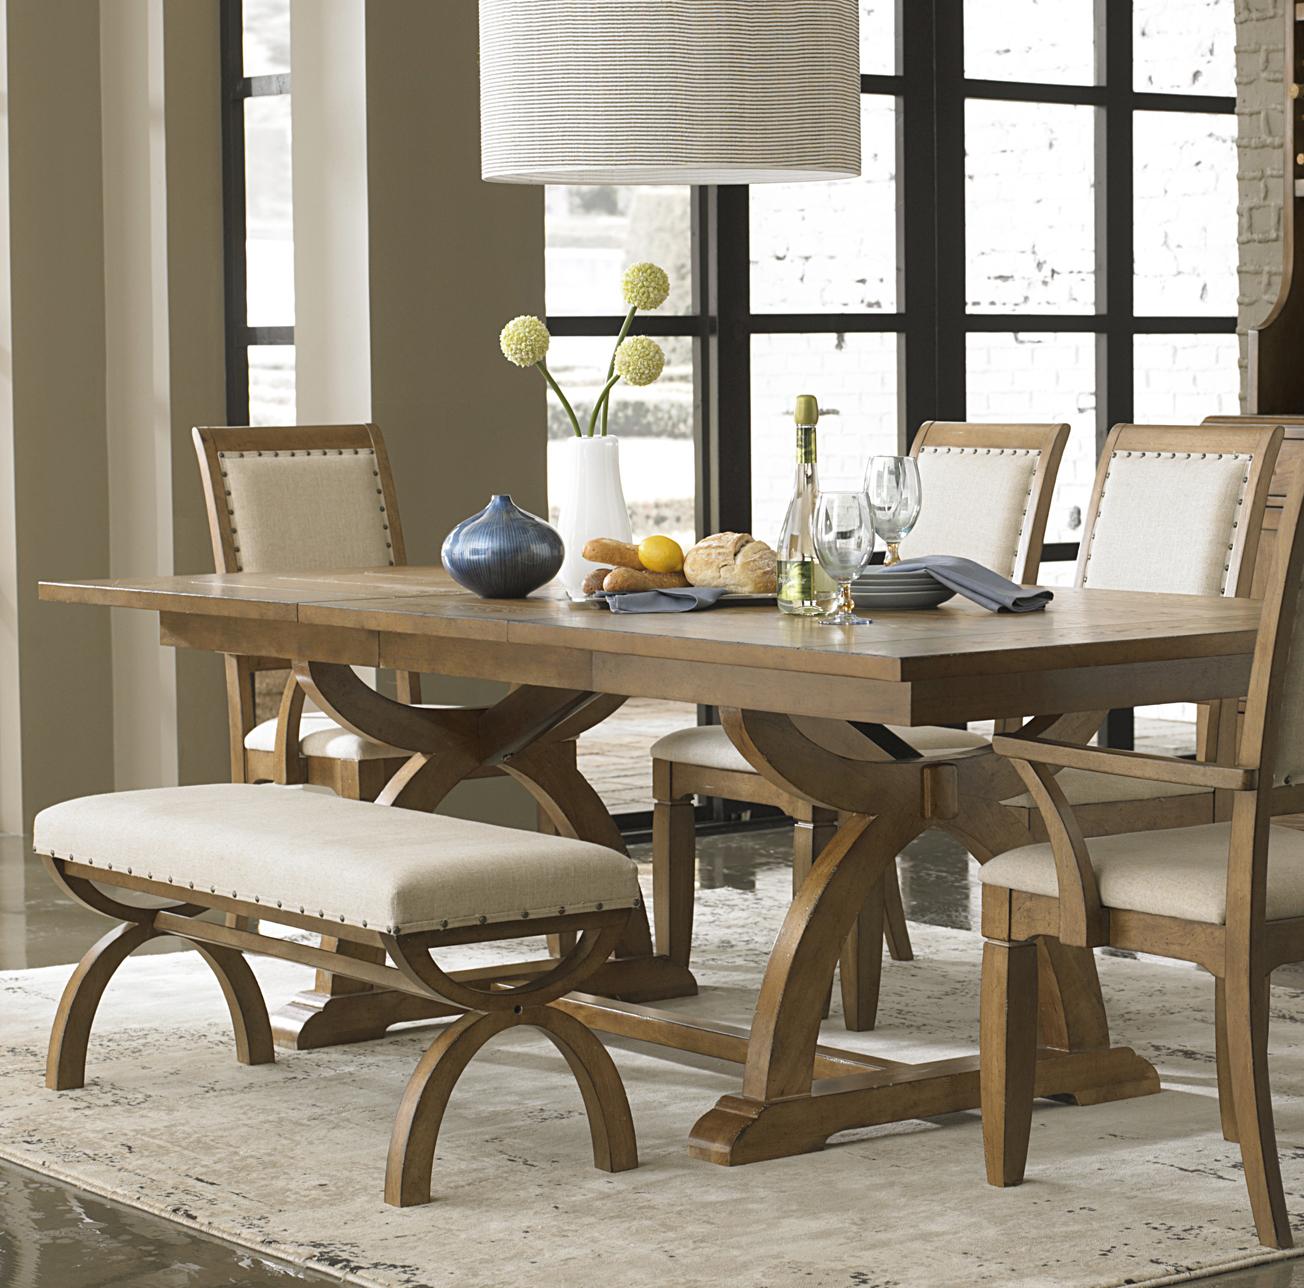 Dining Room Table with Bench Seat | HomesFeed